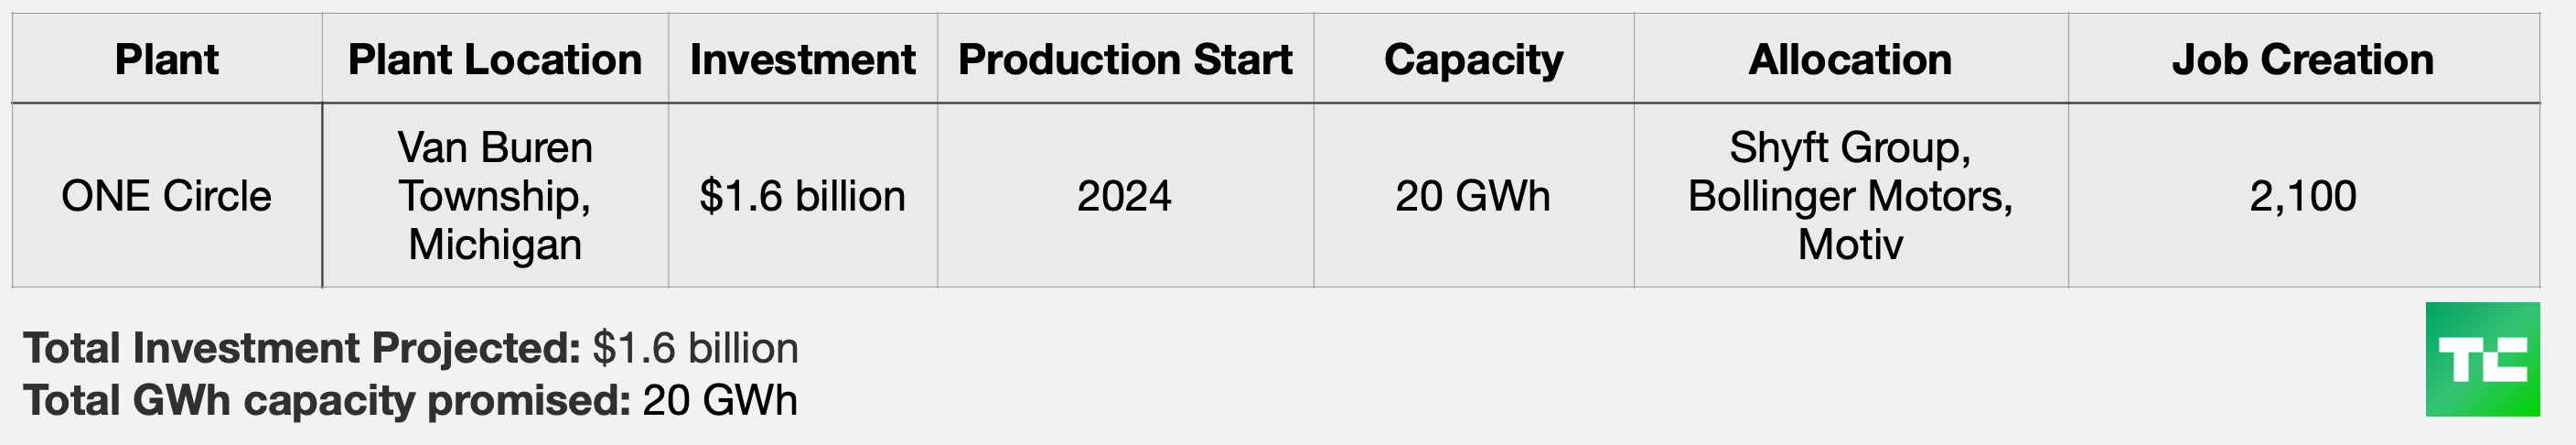 Our Next Energy's battery plant production plans broken down by plant name, plant location, investment, production start, capacity, allocation and the number of jobs it will create. Our Next Energy's total investment projected to be $1.6 billion. Total GWh capacity promised is 20 GWh. 